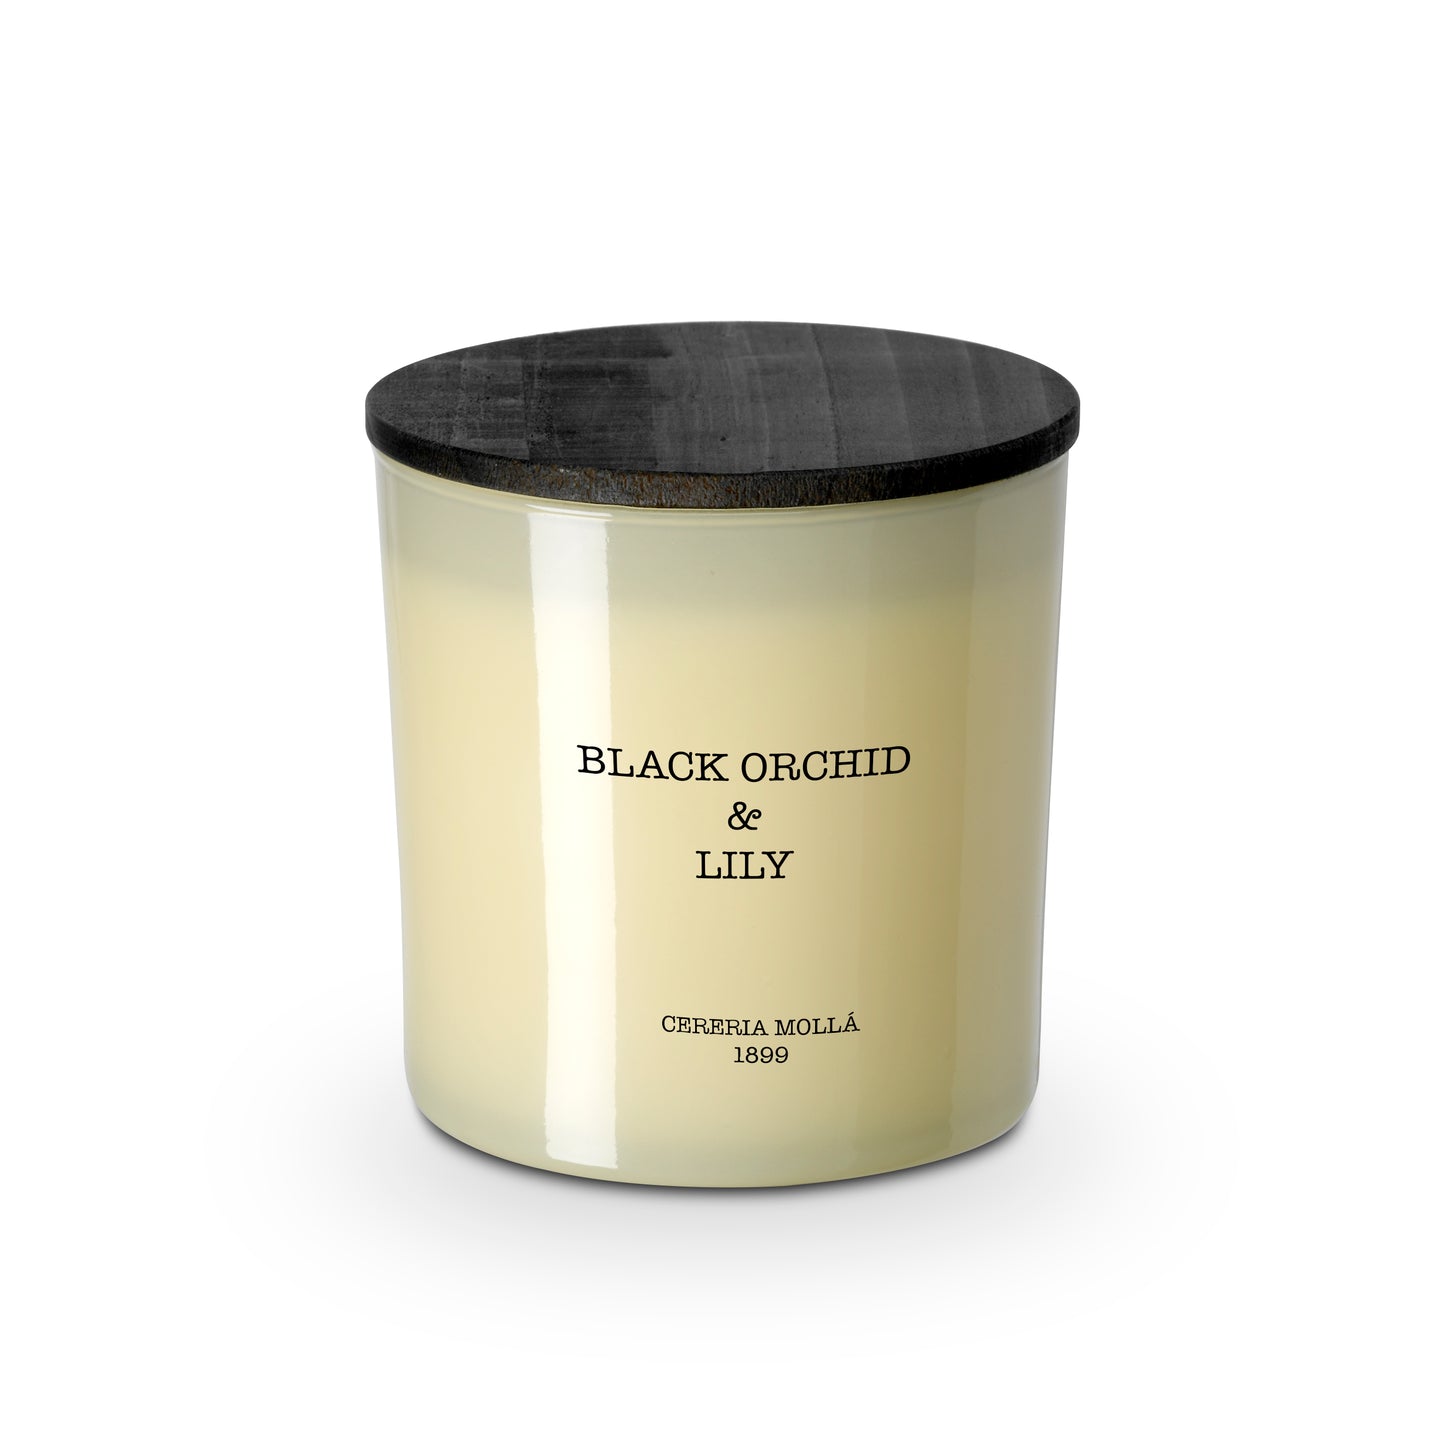 Black Orchid & Lily Fragrance by Cereria Molla